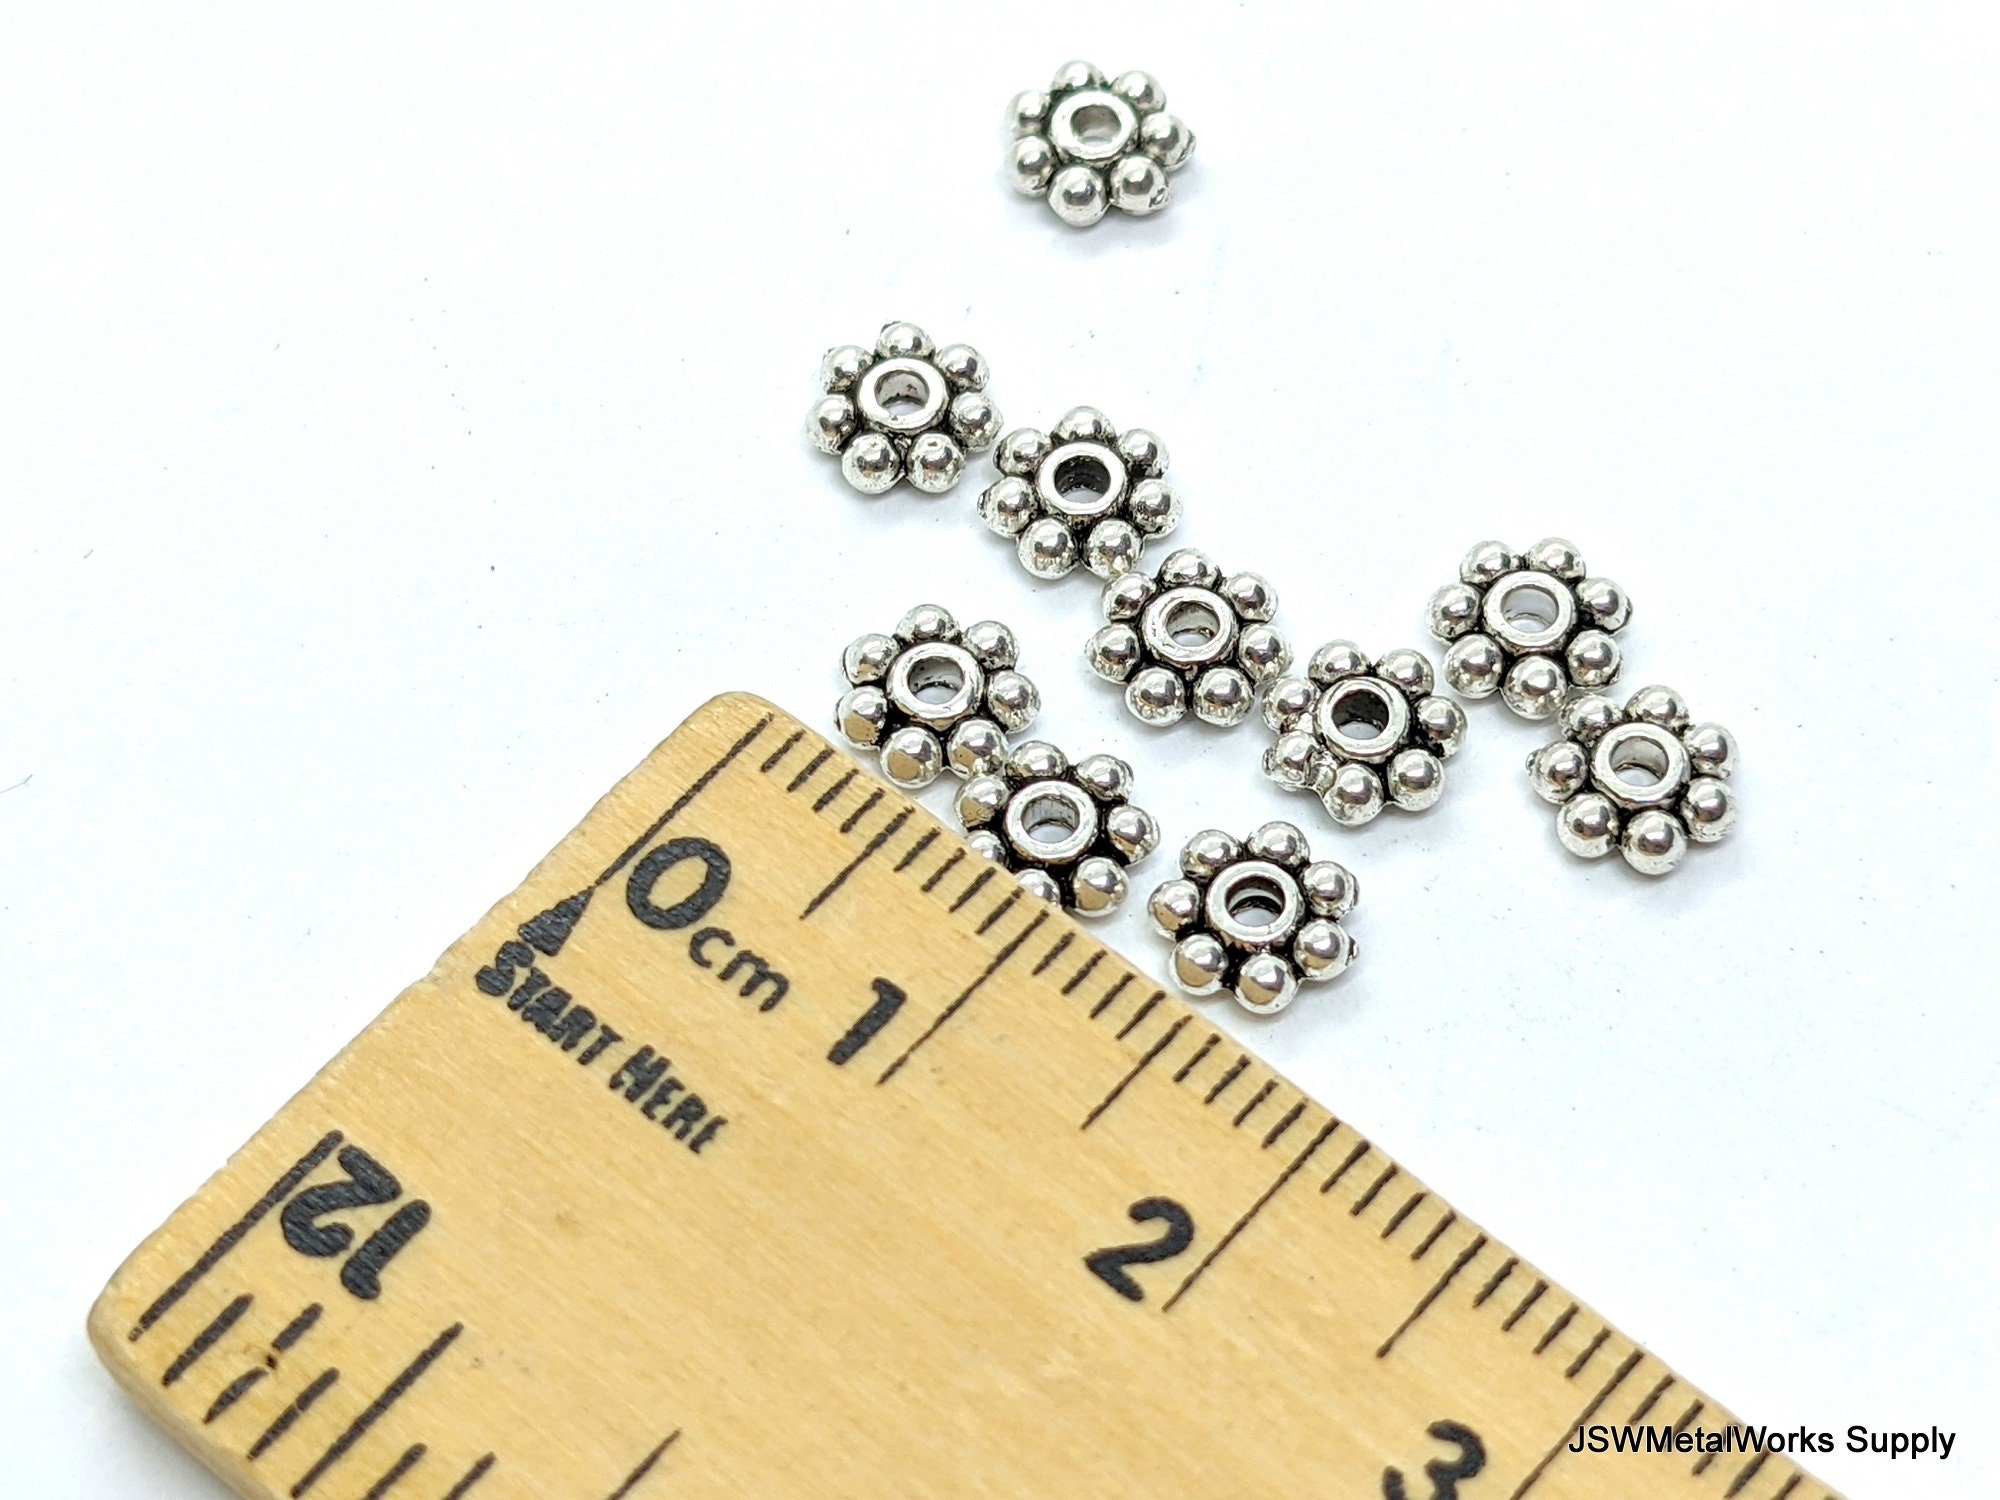 M8952 100 pieces 100 Antique silver pewter 4x3mm rondelle spacer beads 